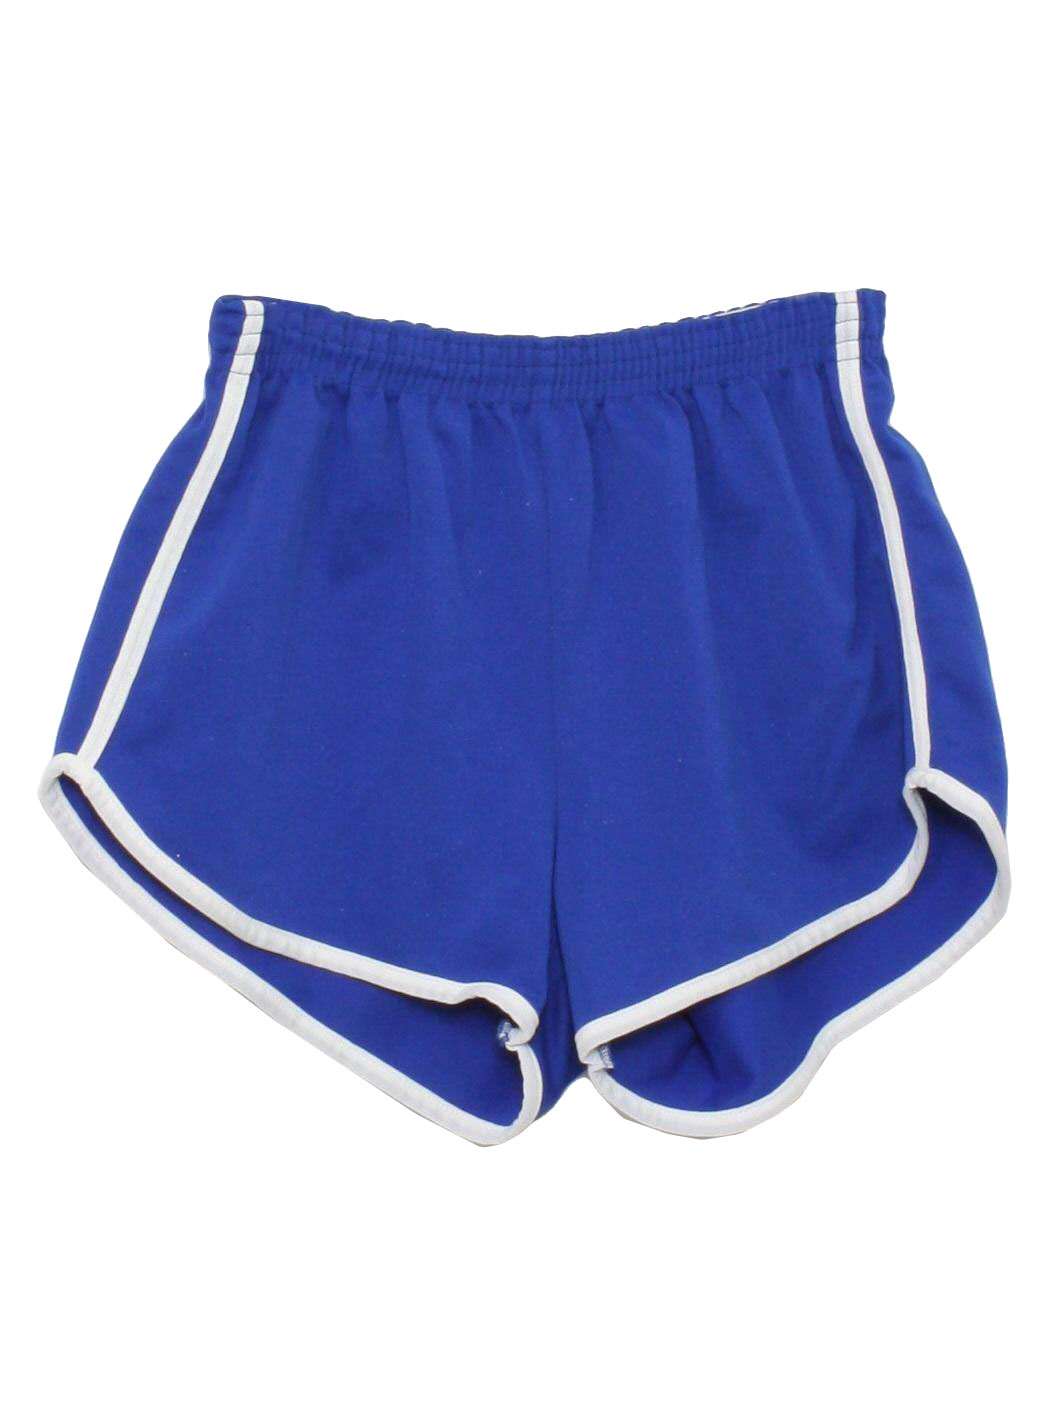 1970's Vintage Kmart Shorts: 70s -Kmart- Mens royal blue double knit  polyester, elastic waist gym shorts with white piped seam stripe design and  notched side vent hems. Shorts have tiny white spots